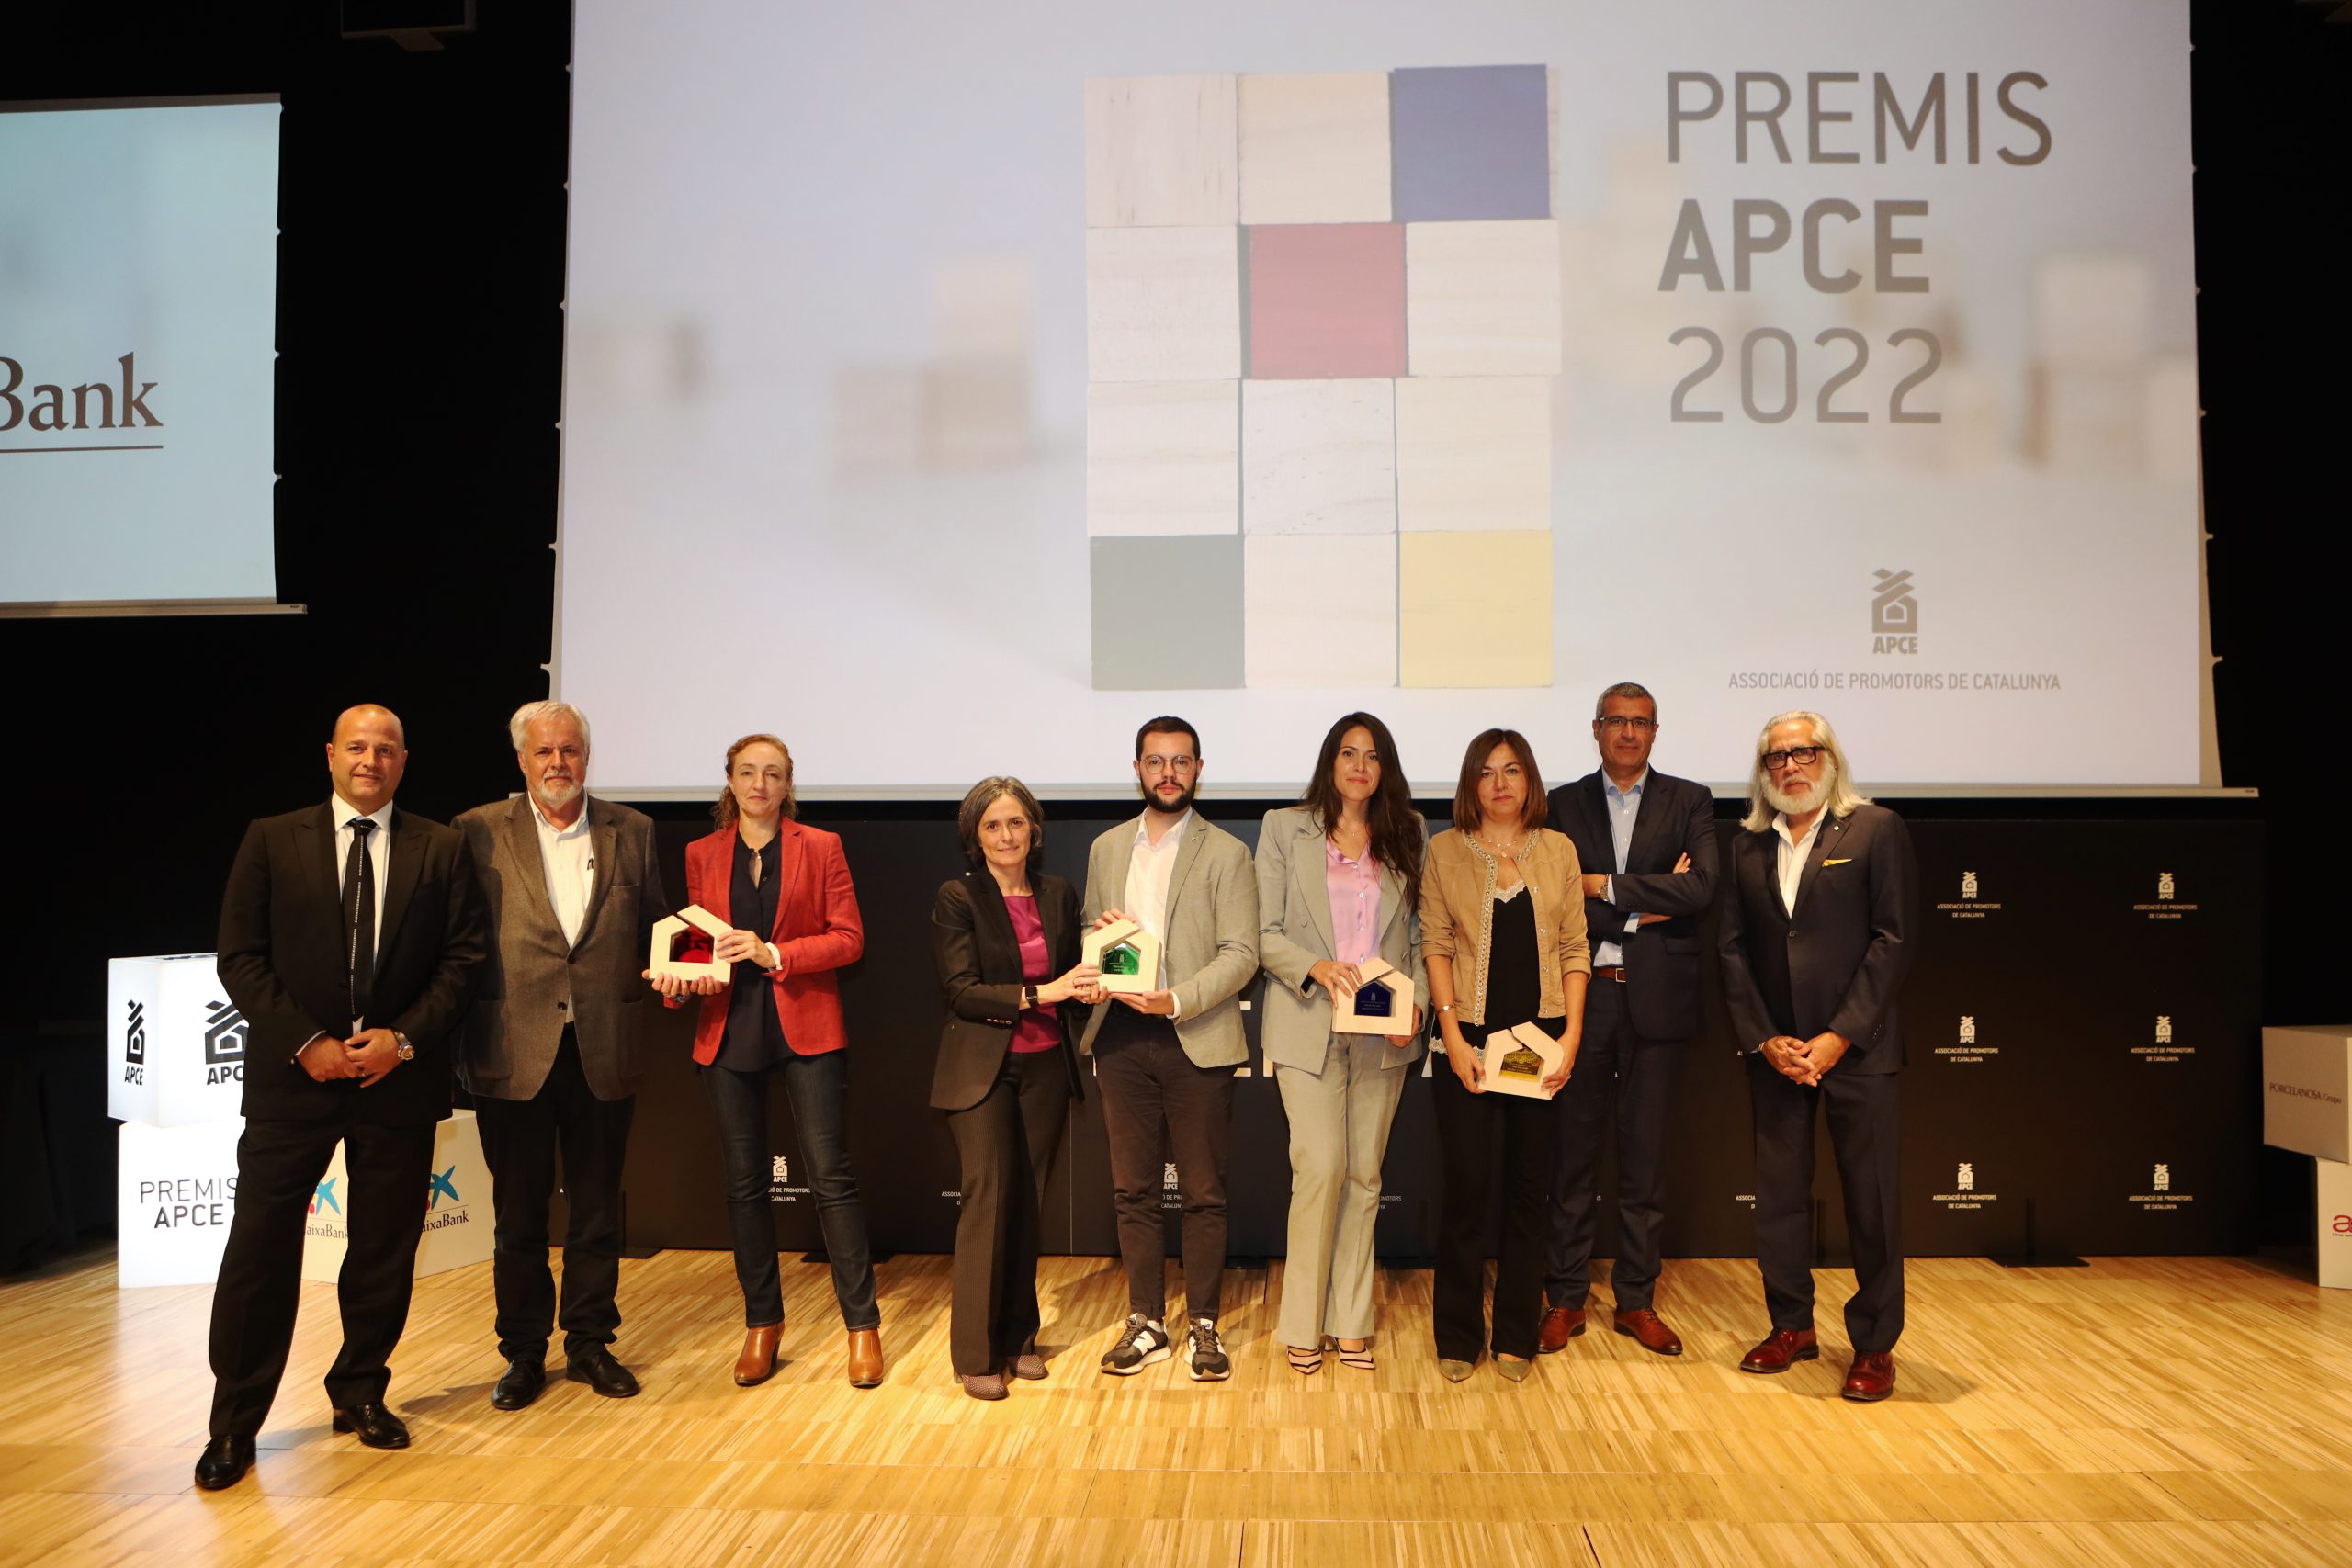 The APCE awards Sogeviso the Social Commitment Award for its socially responsible housing management programme